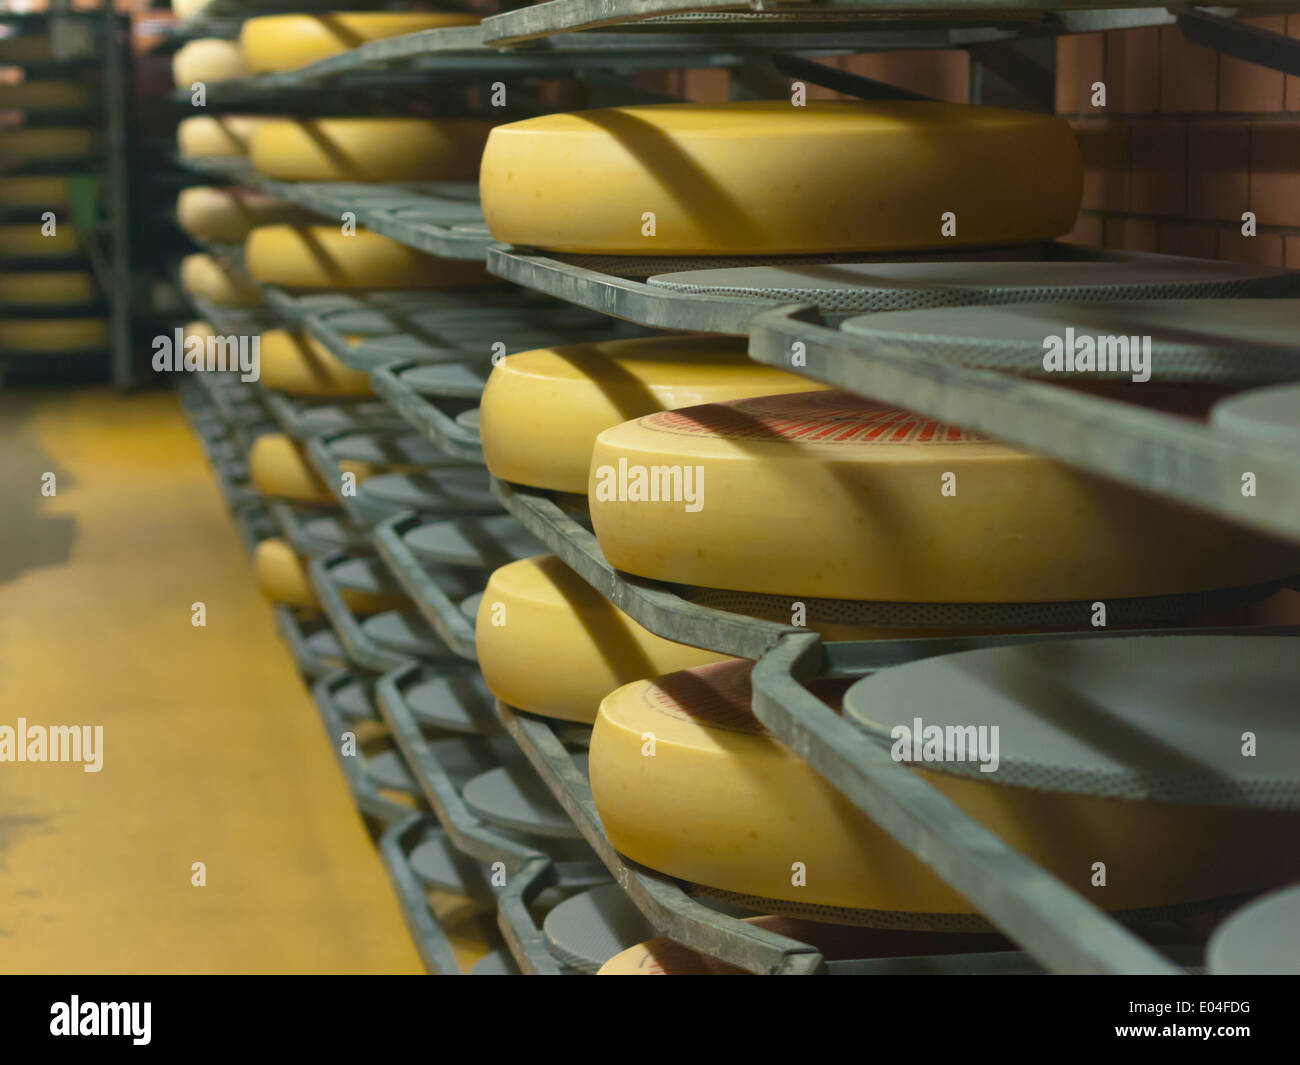 https://c8.alamy.com/comp/E04FDG/swiss-cheese-wheels-stored-for-aging-in-a-cheese-dairy-in-emmental-E04FDG.jpg